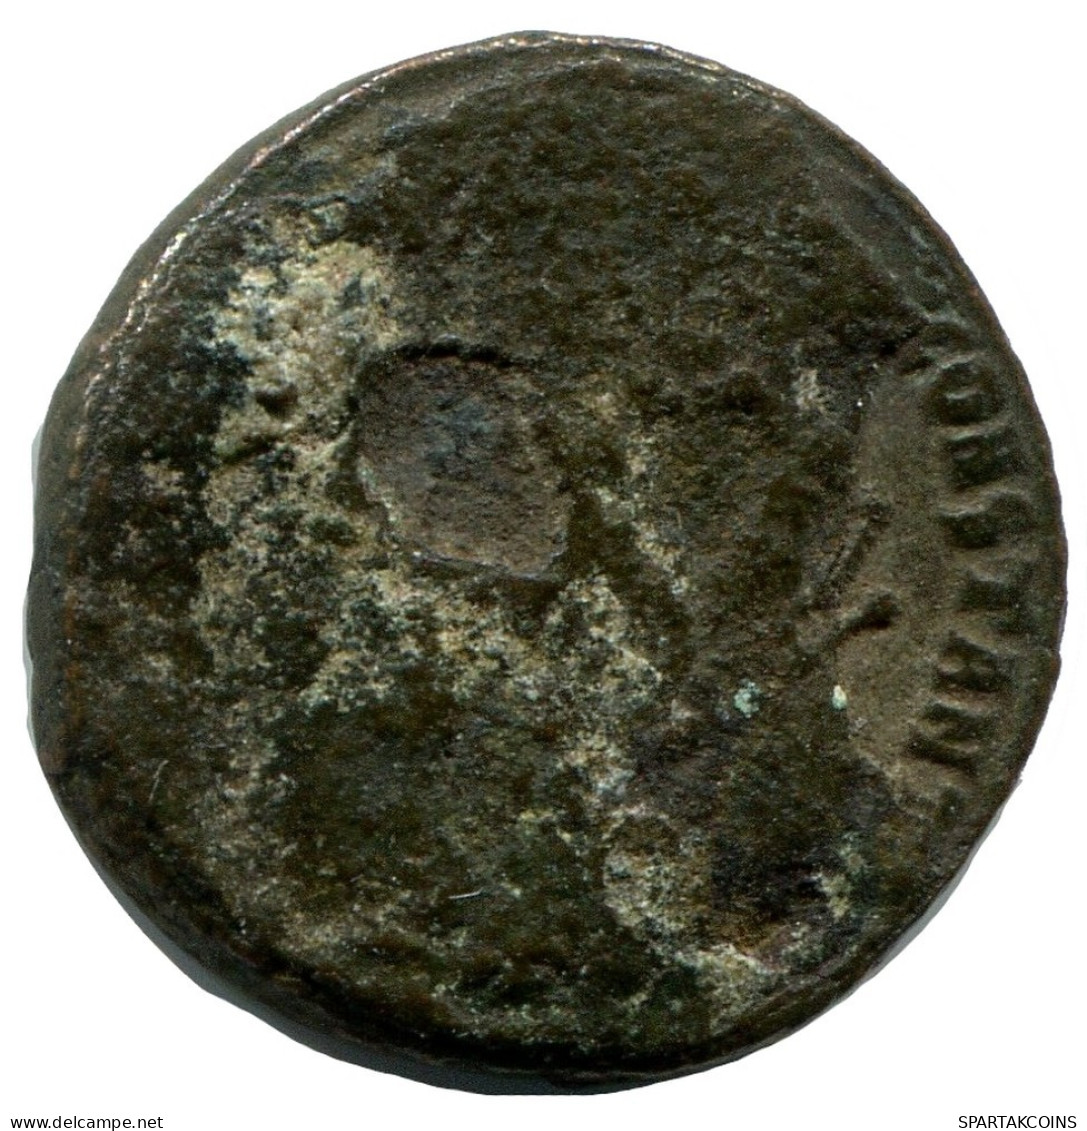 CONSTANTINE I MINTED IN ANTIOCH FOUND IN IHNASYAH HOARD EGYPT #ANC10623.14.D.A - L'Empire Chrétien (307 à 363)